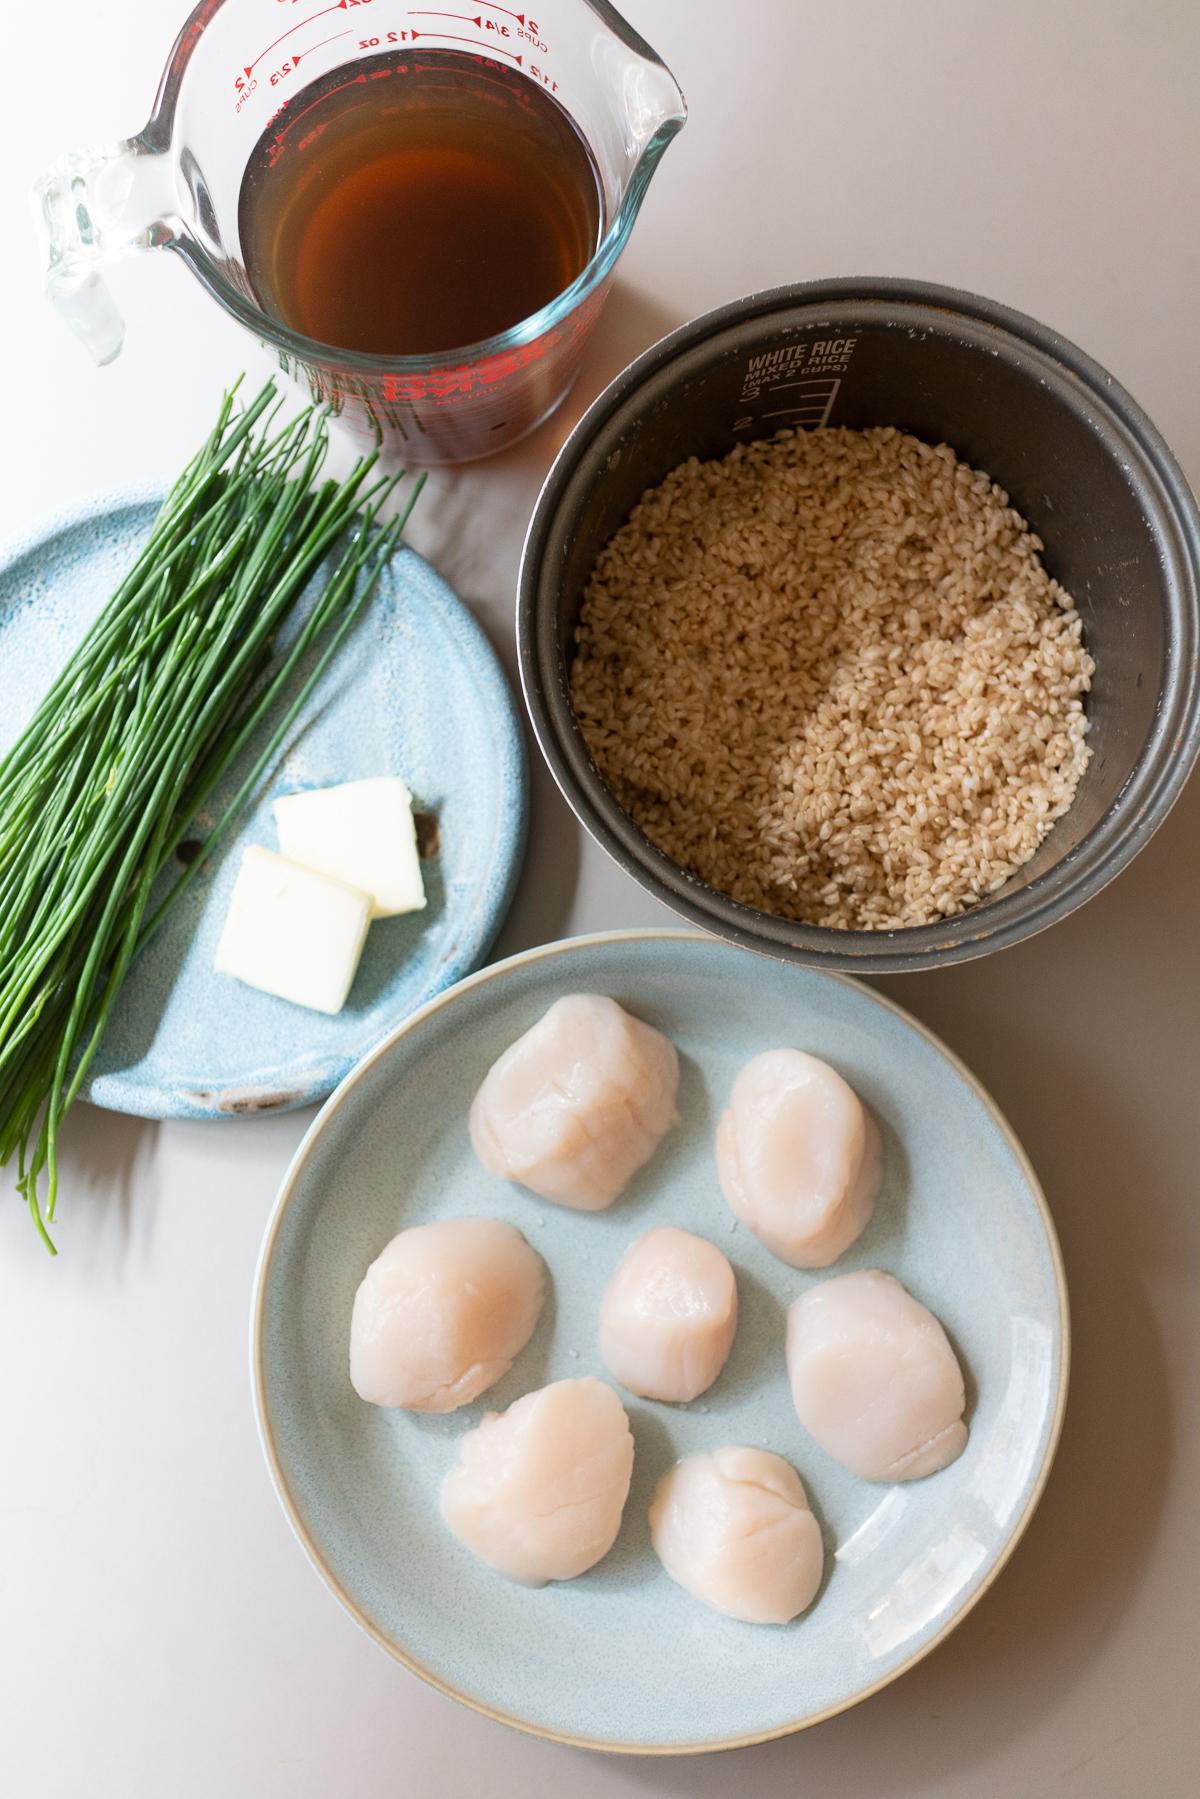 Ingredients for scallop and rice: scallops, rice, chives, butter, cooking broth